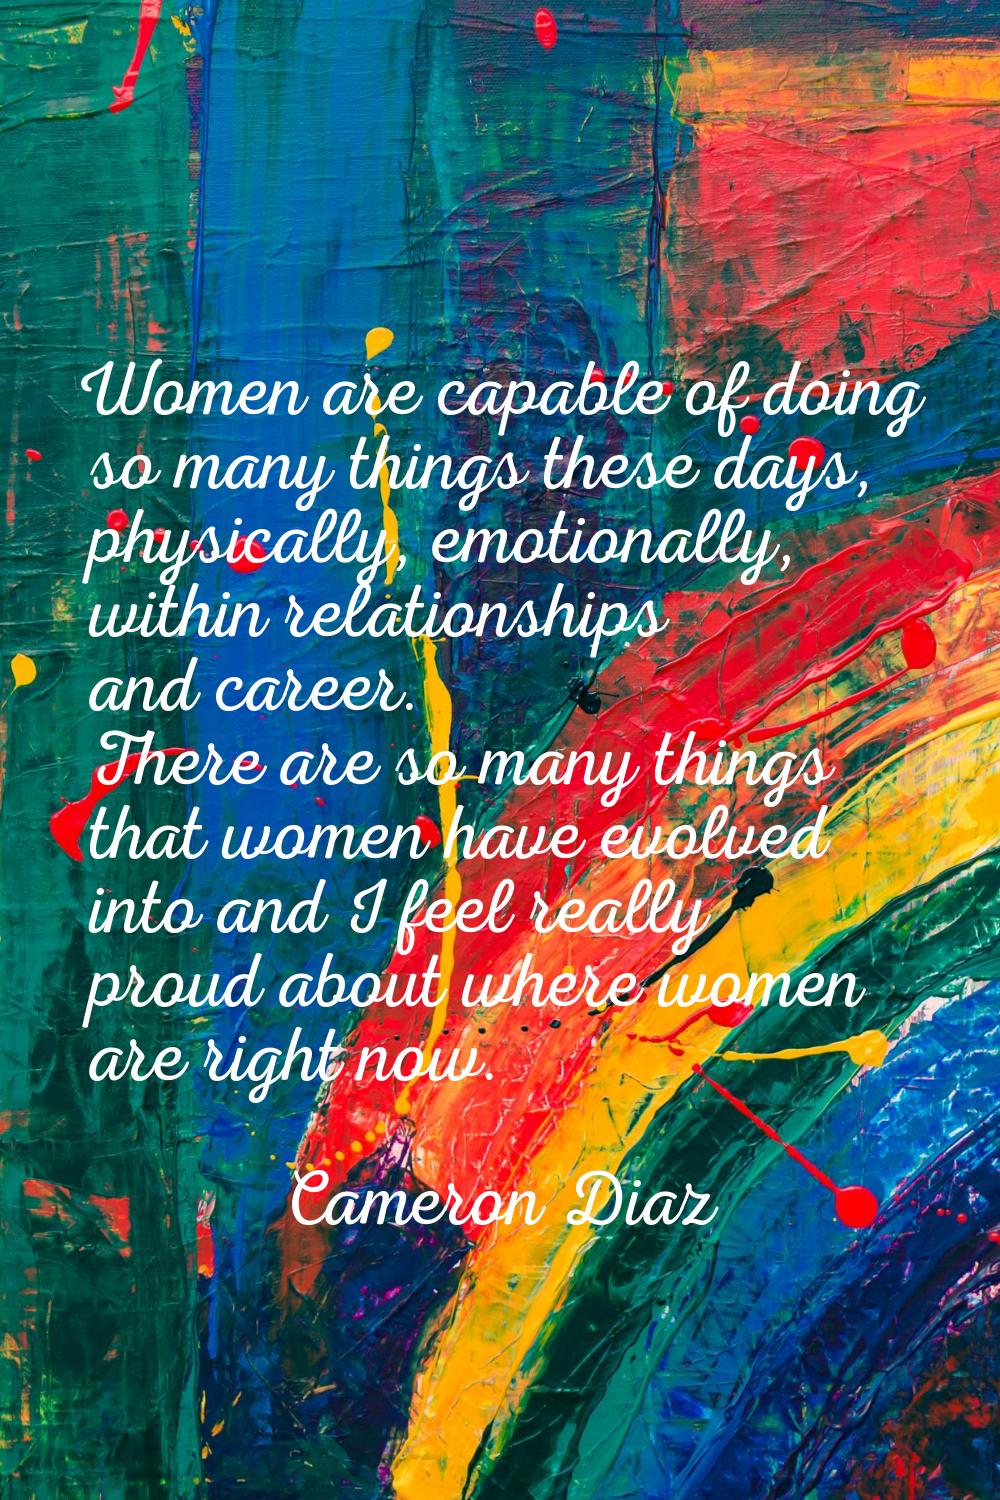 Women are capable of doing so many things these days, physically, emotionally, within relationships